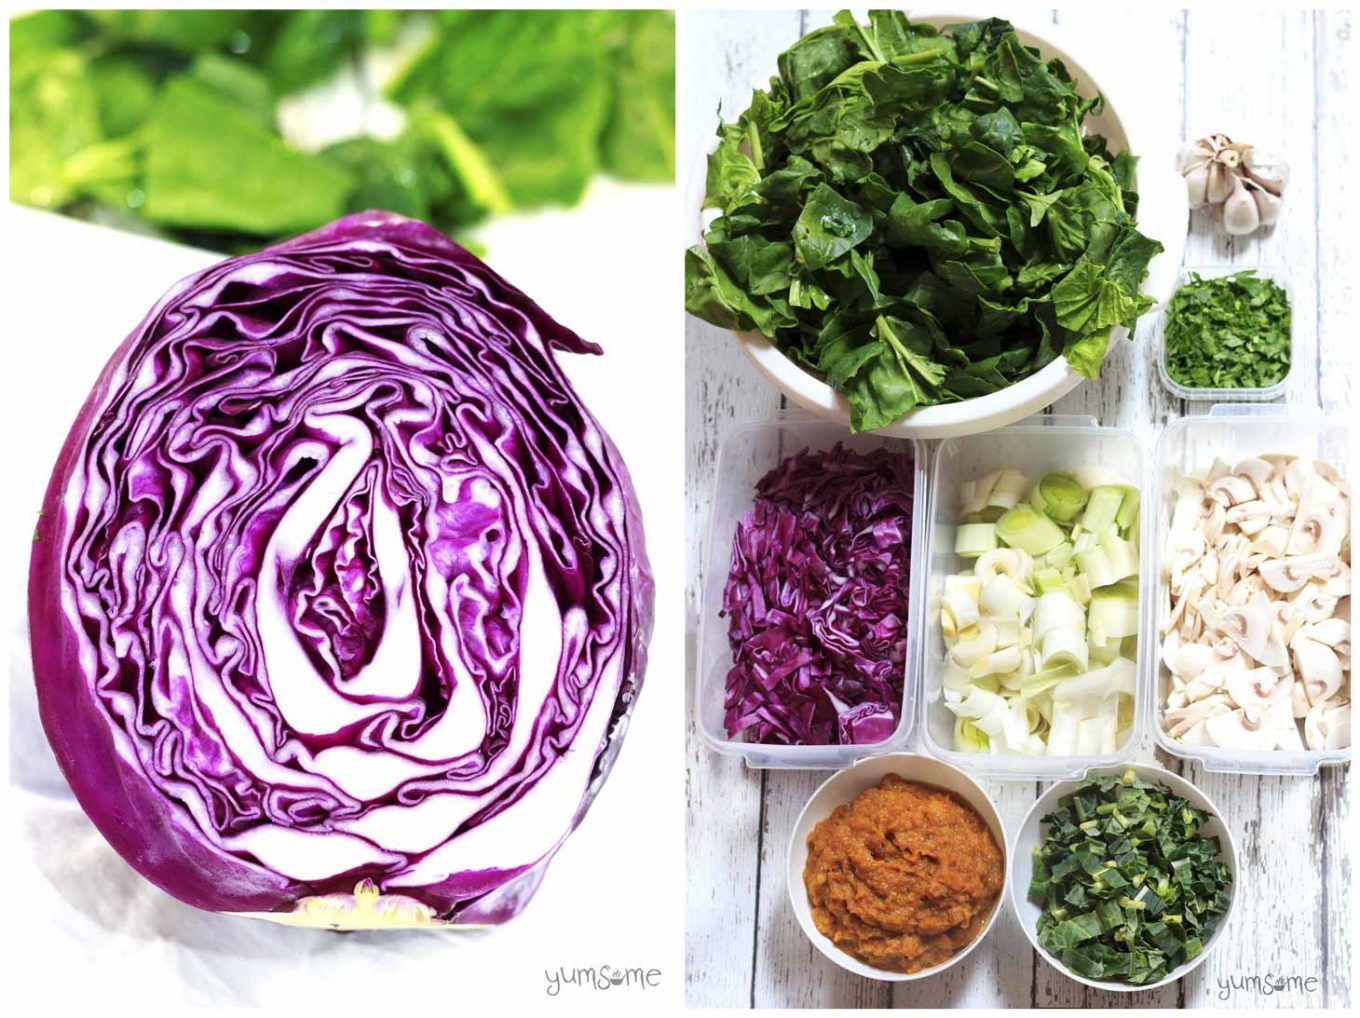 A red cabbage, plus various other ingredients for making vegan red cabbage stuffing.